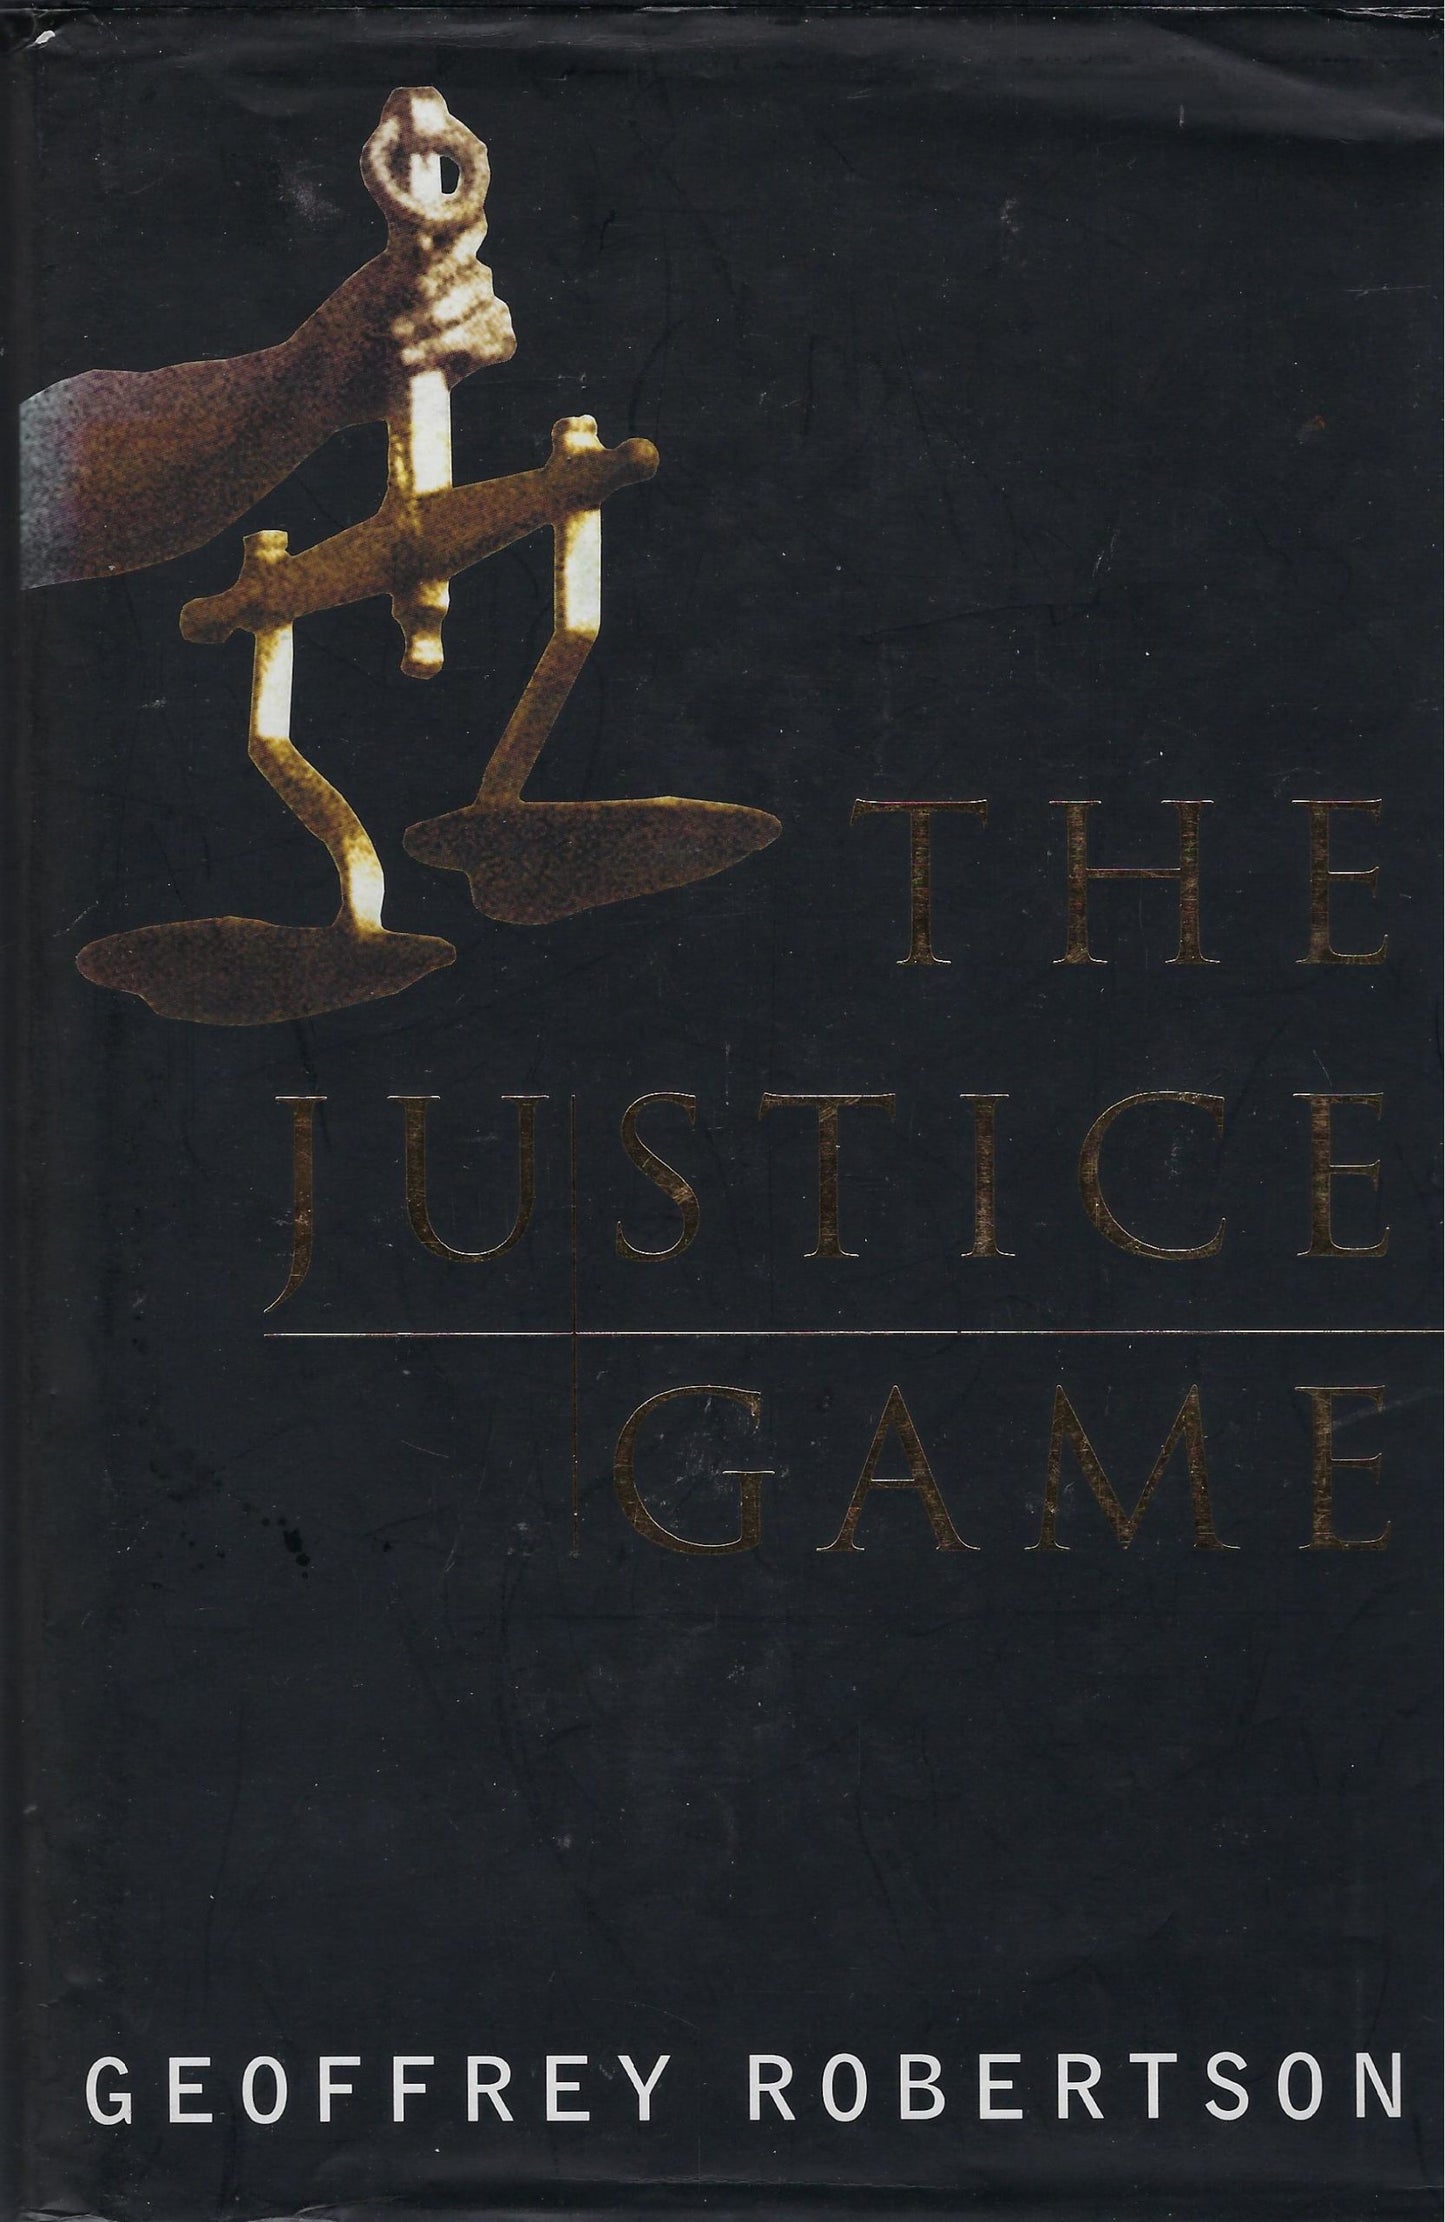 The justice game